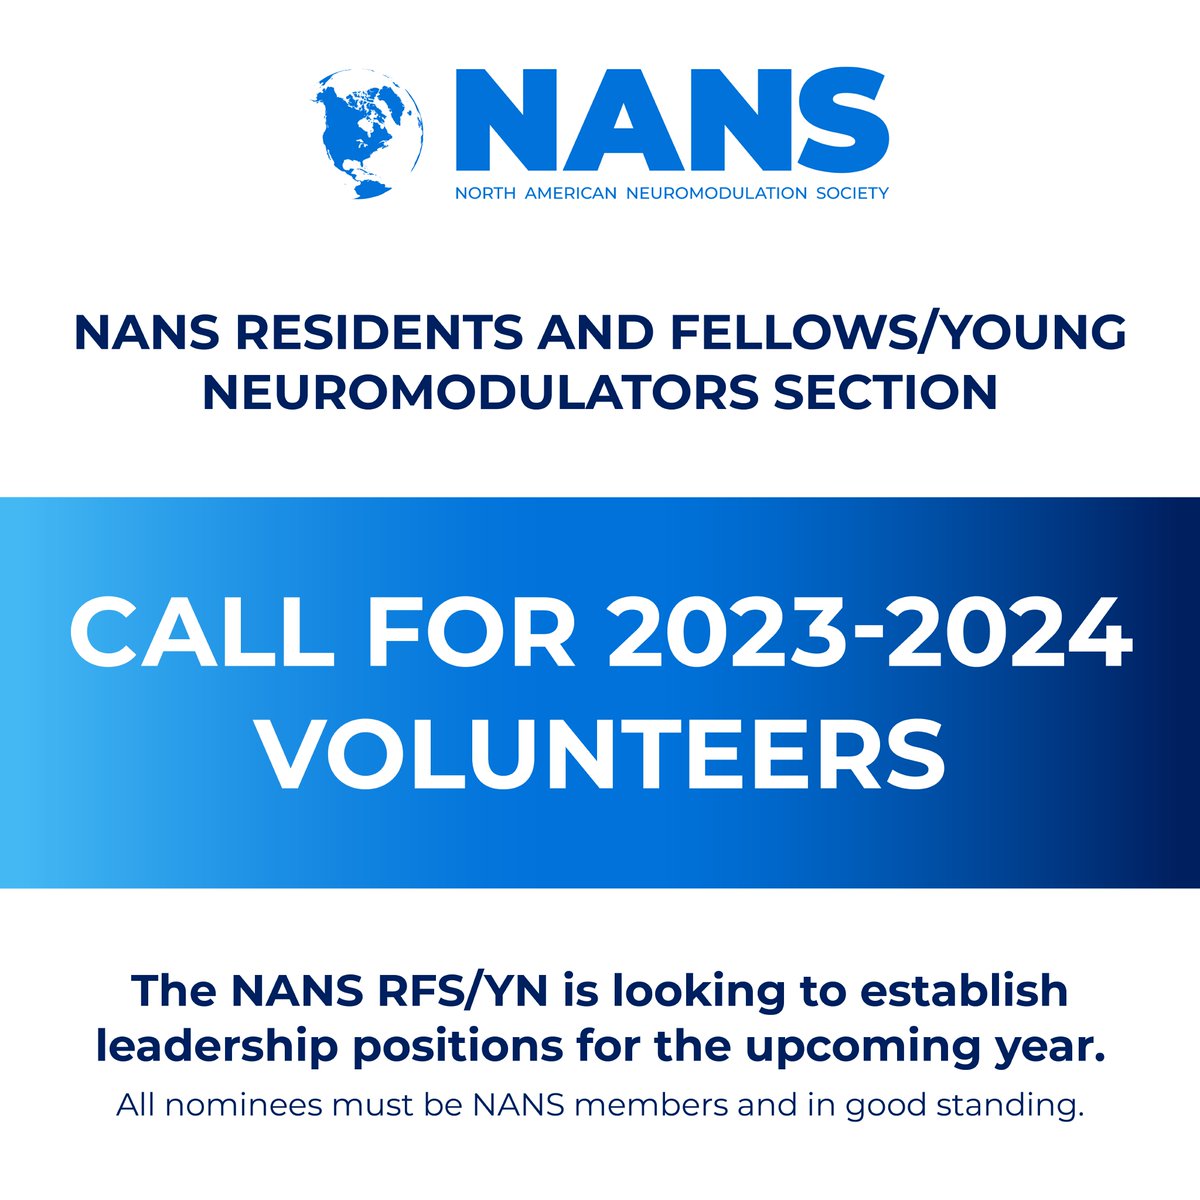 Are you looking to get involved with #NANS? If so, we invite you to apply to serve on the RFS/YN section! If you are interested, please fill out the form at surveymonkey.com/r/NANSRFSYN.